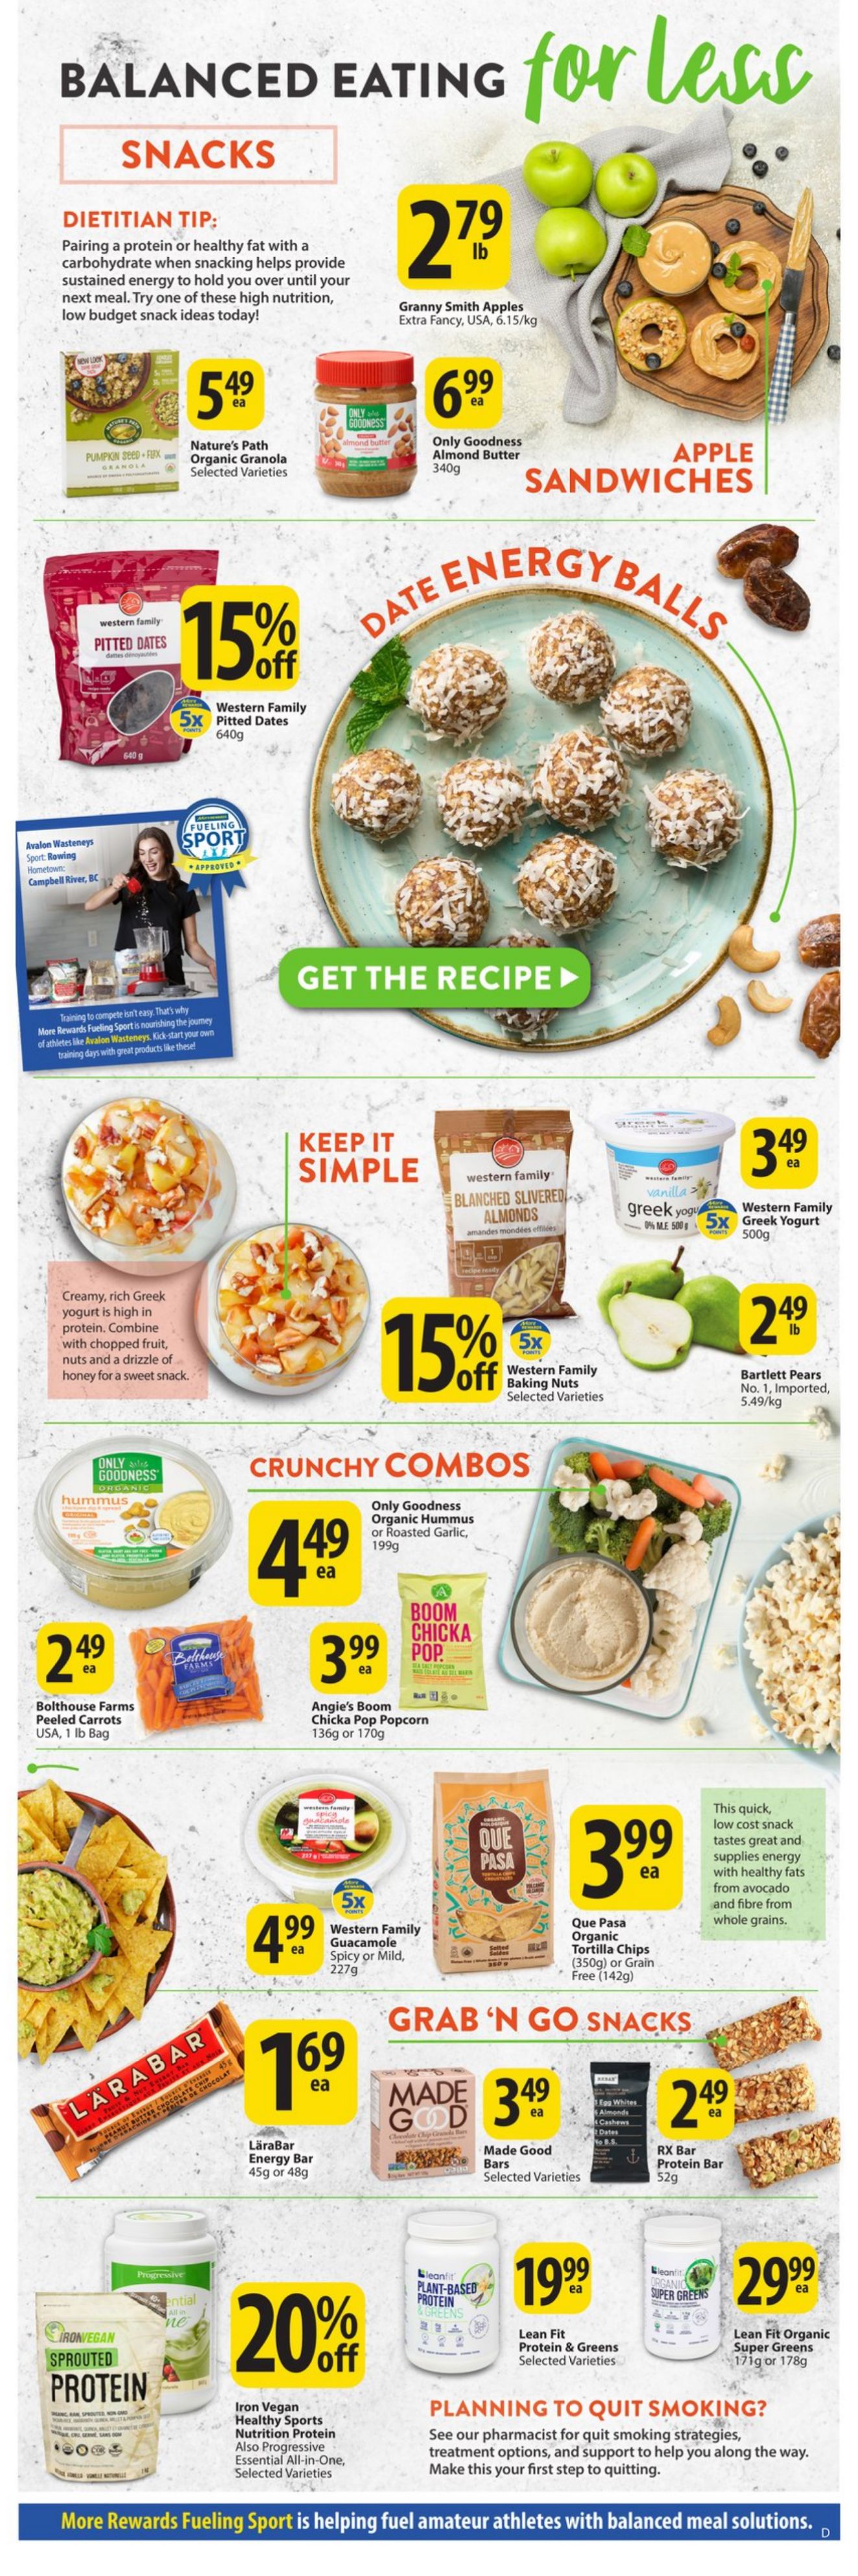 Flyer Save-On-Foods 05.01.2023 - 11.01.2023